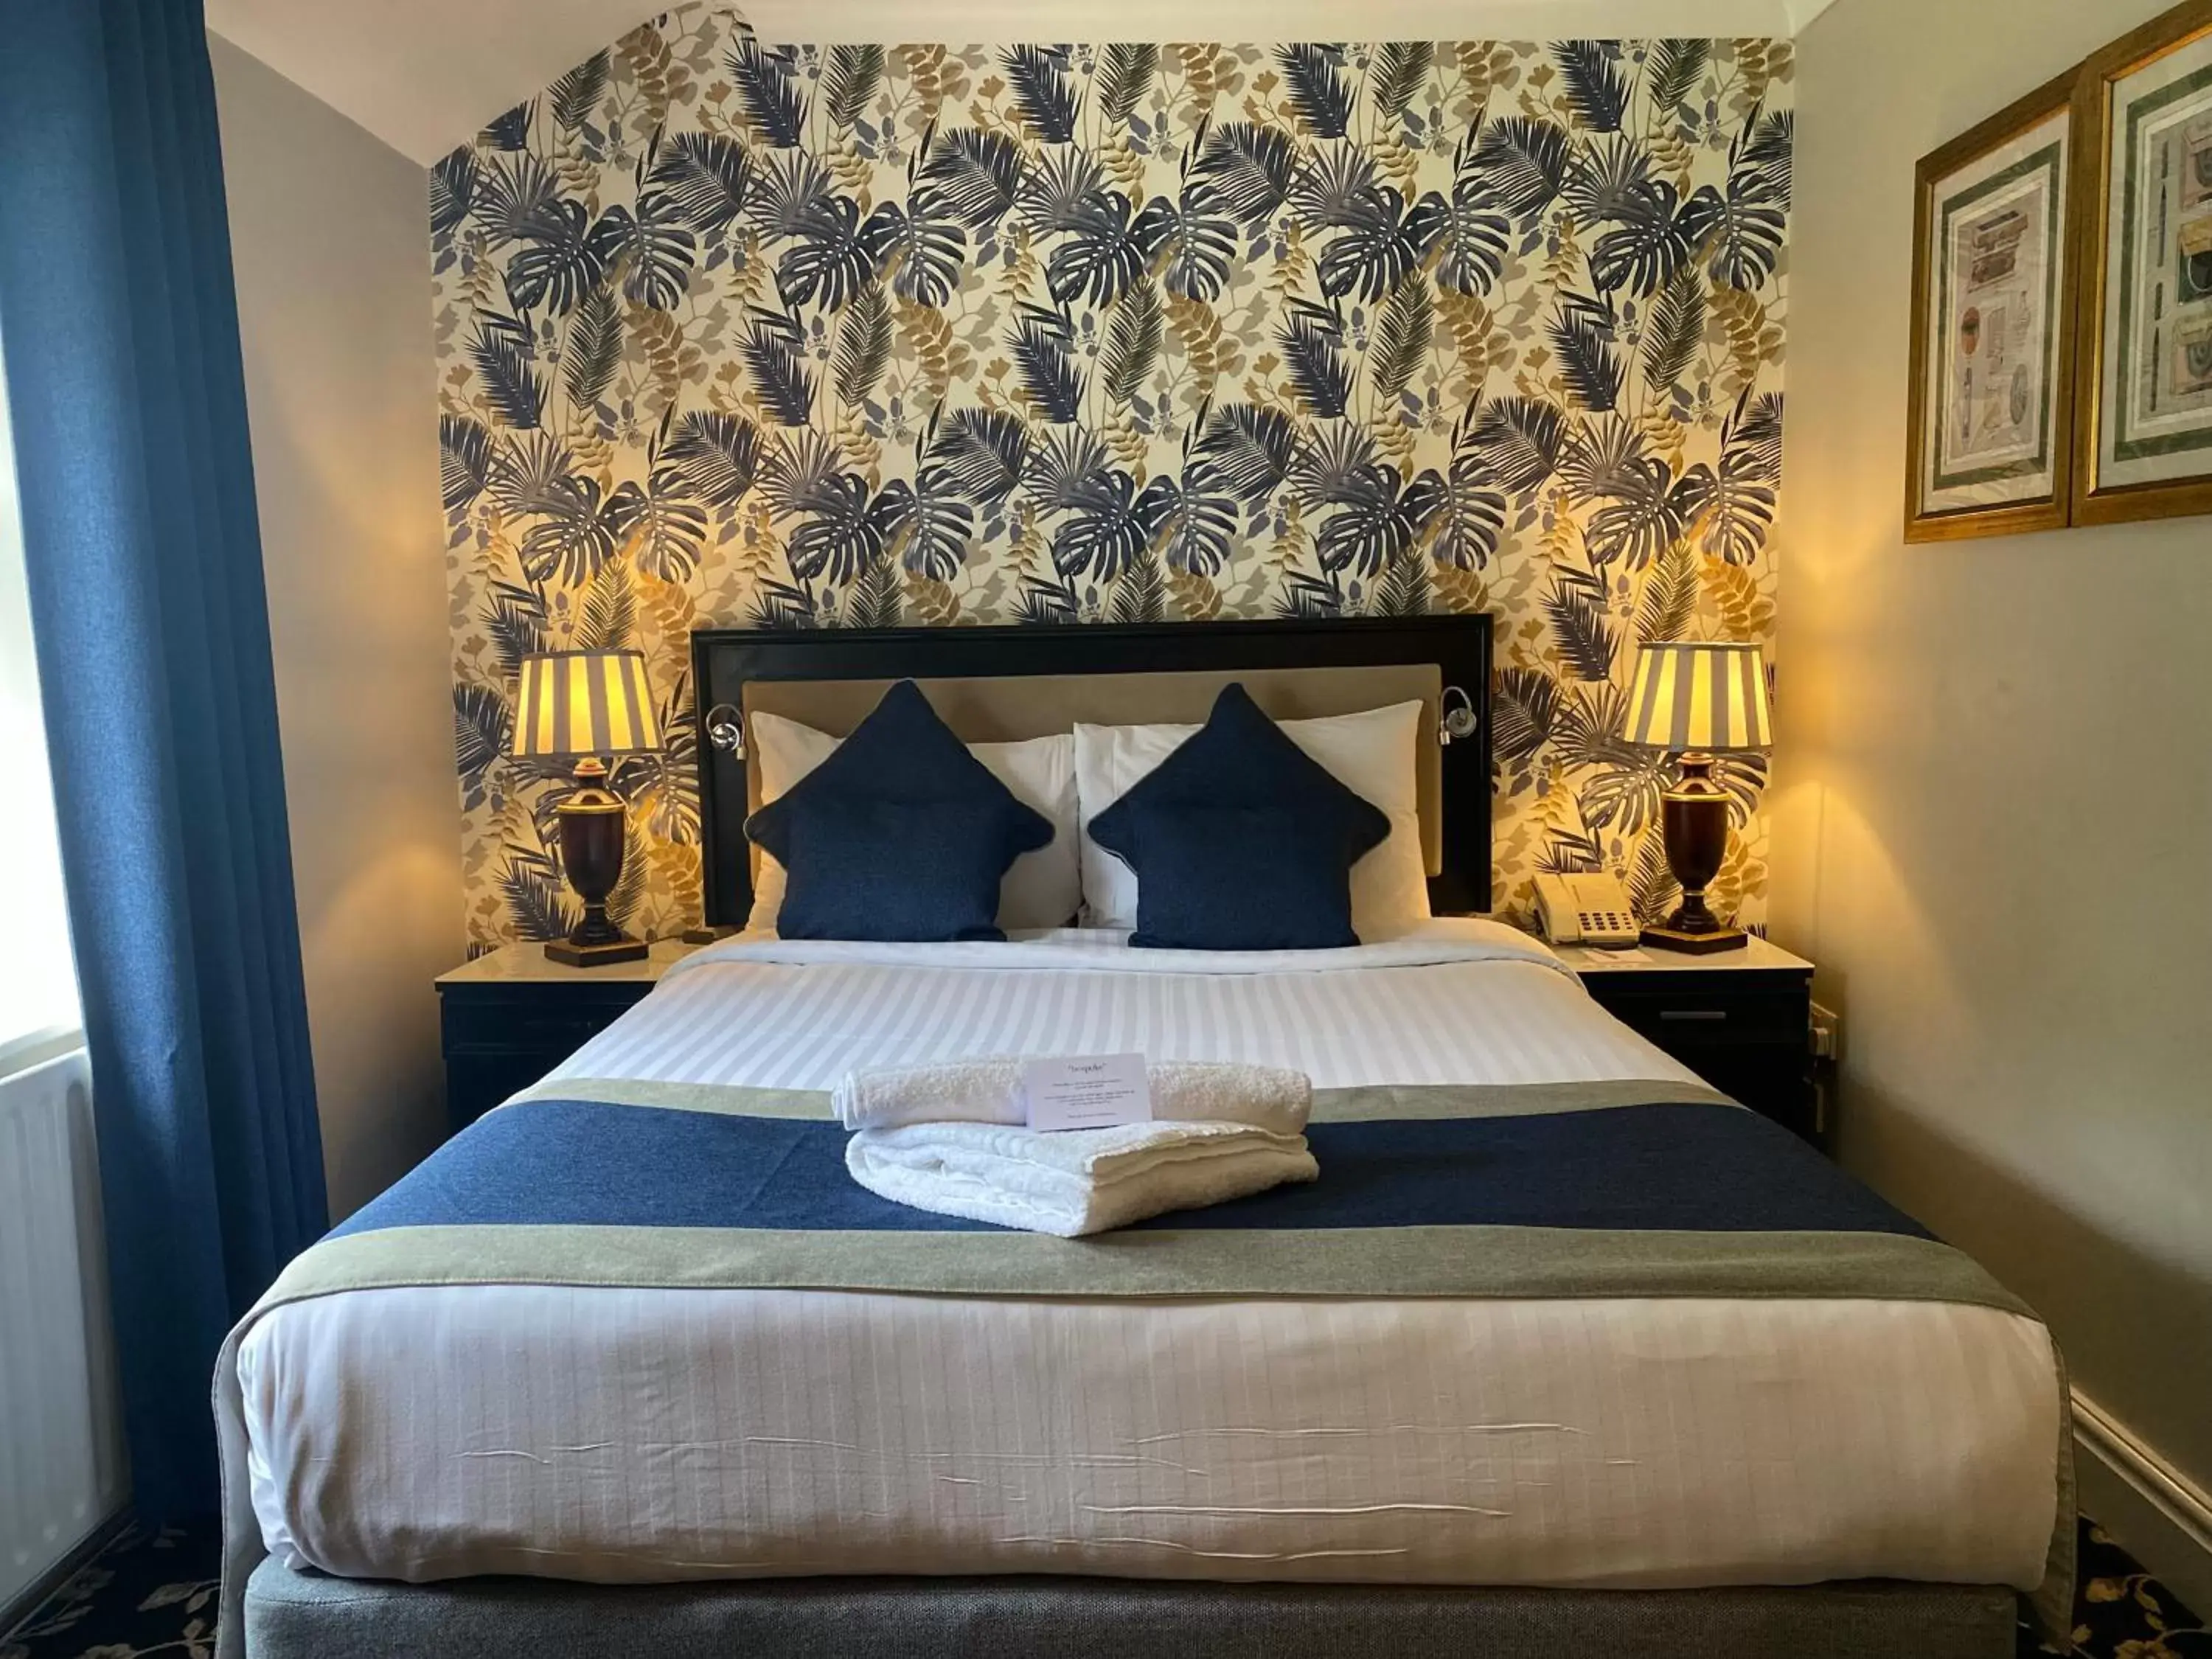 Bedroom, Bed in Stone House Hotel ‘A Bespoke Hotel’